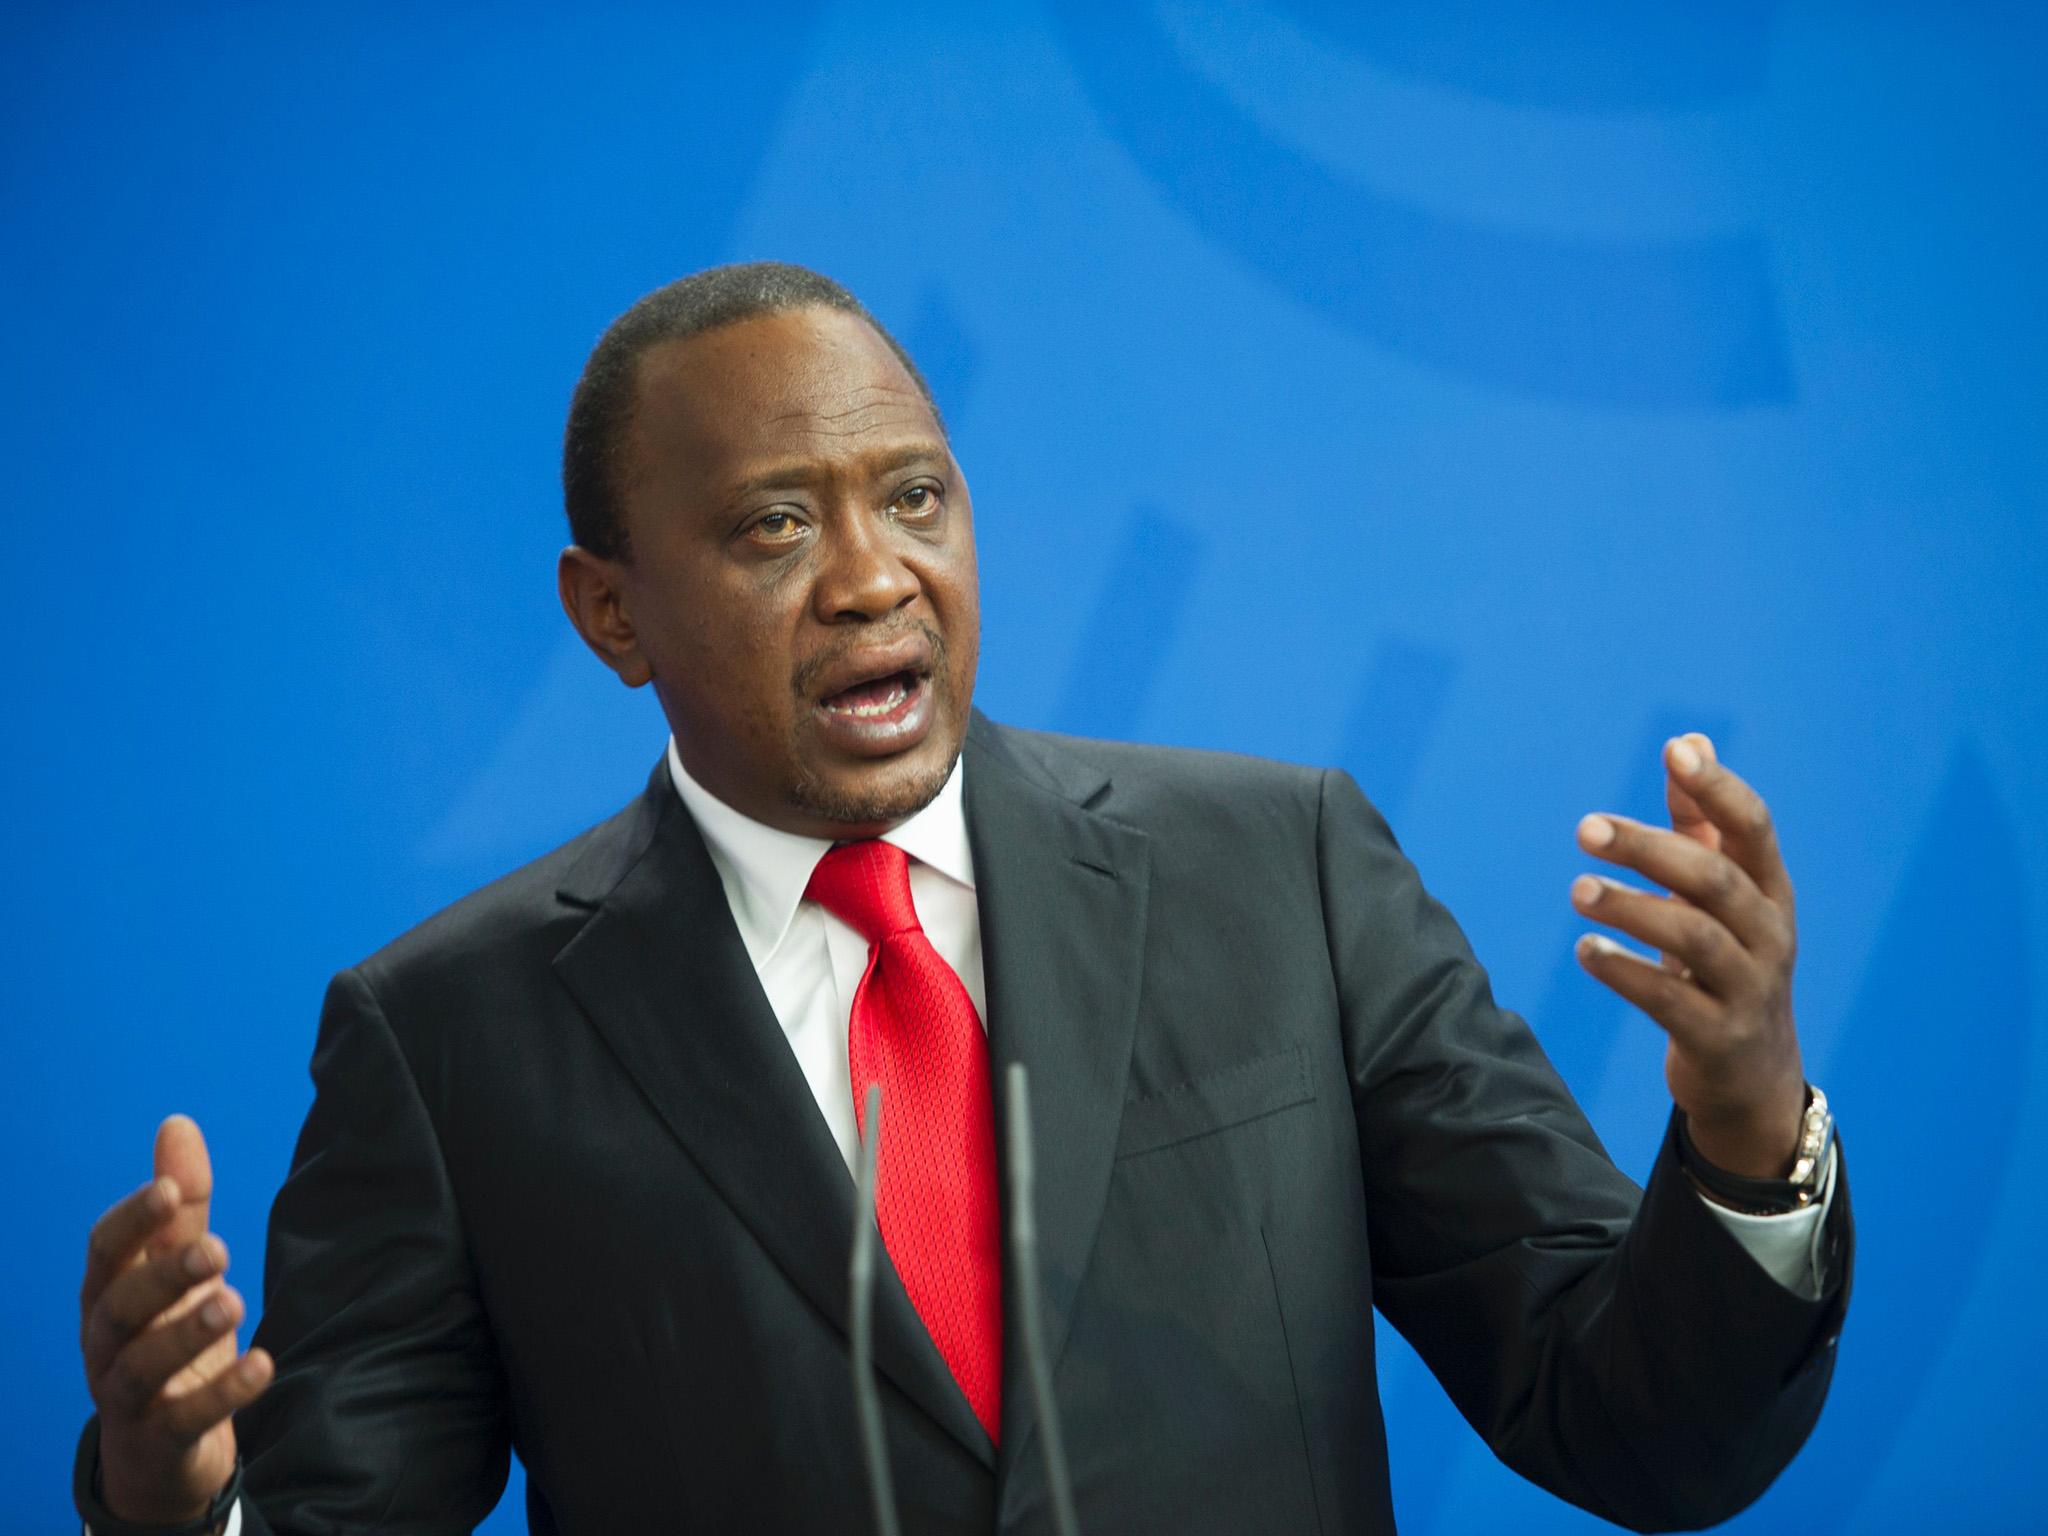 Kenya: State hands over President Uhuru's 'rejected house' to needy family